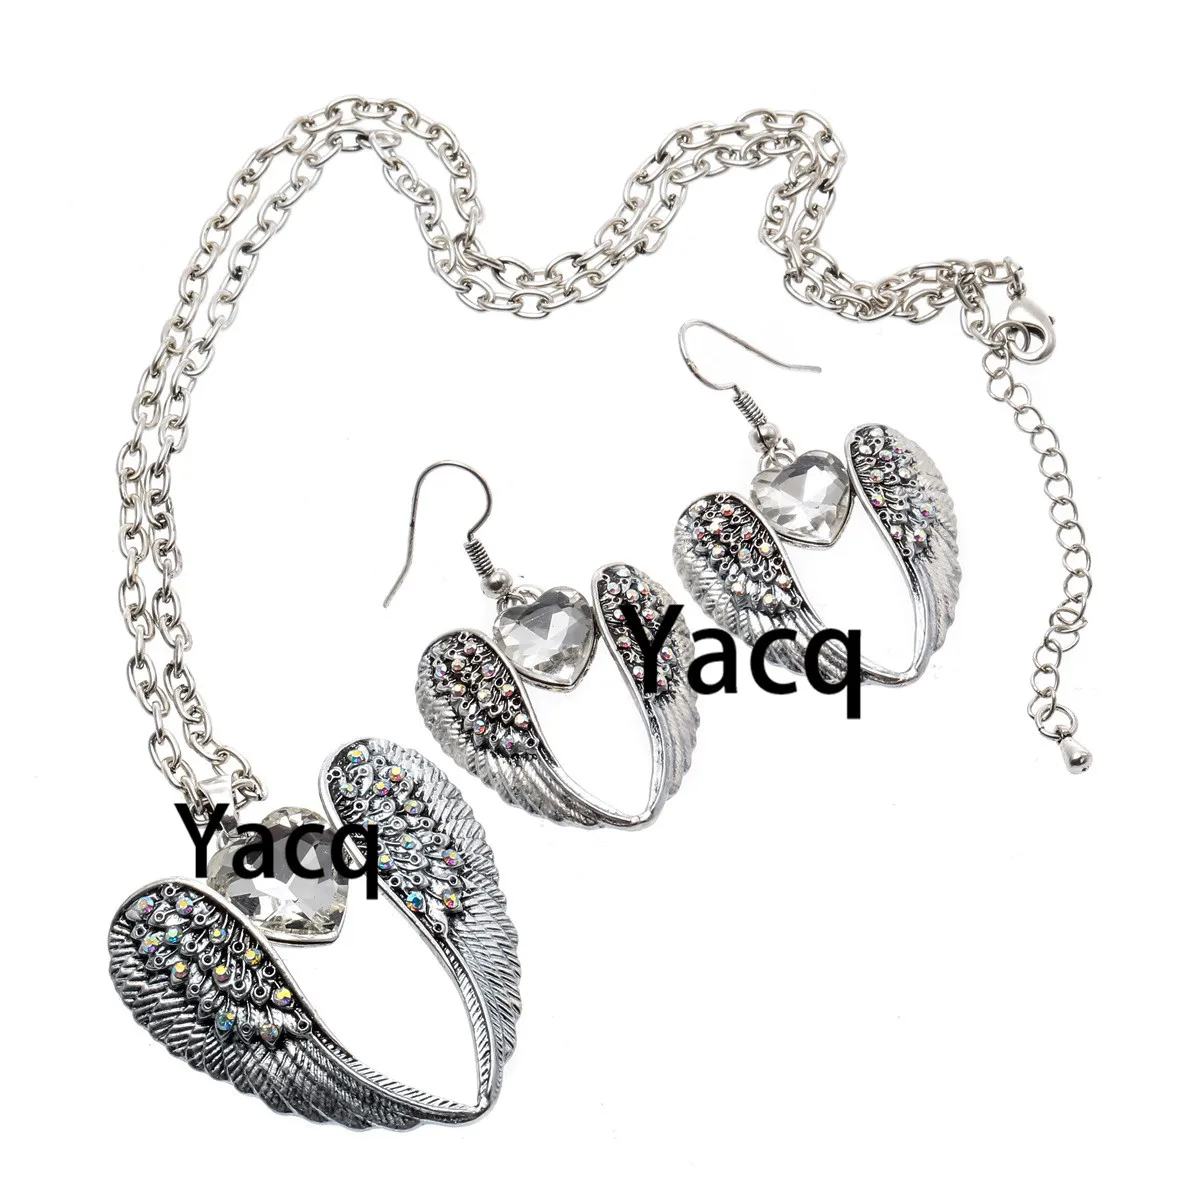 YACQ Guardian Angel Wing Heart Necklace Earrings Sets Antique Silver Color Women Girls Crystal Jewelry Gifts Dropshipping ENC06-animated-img